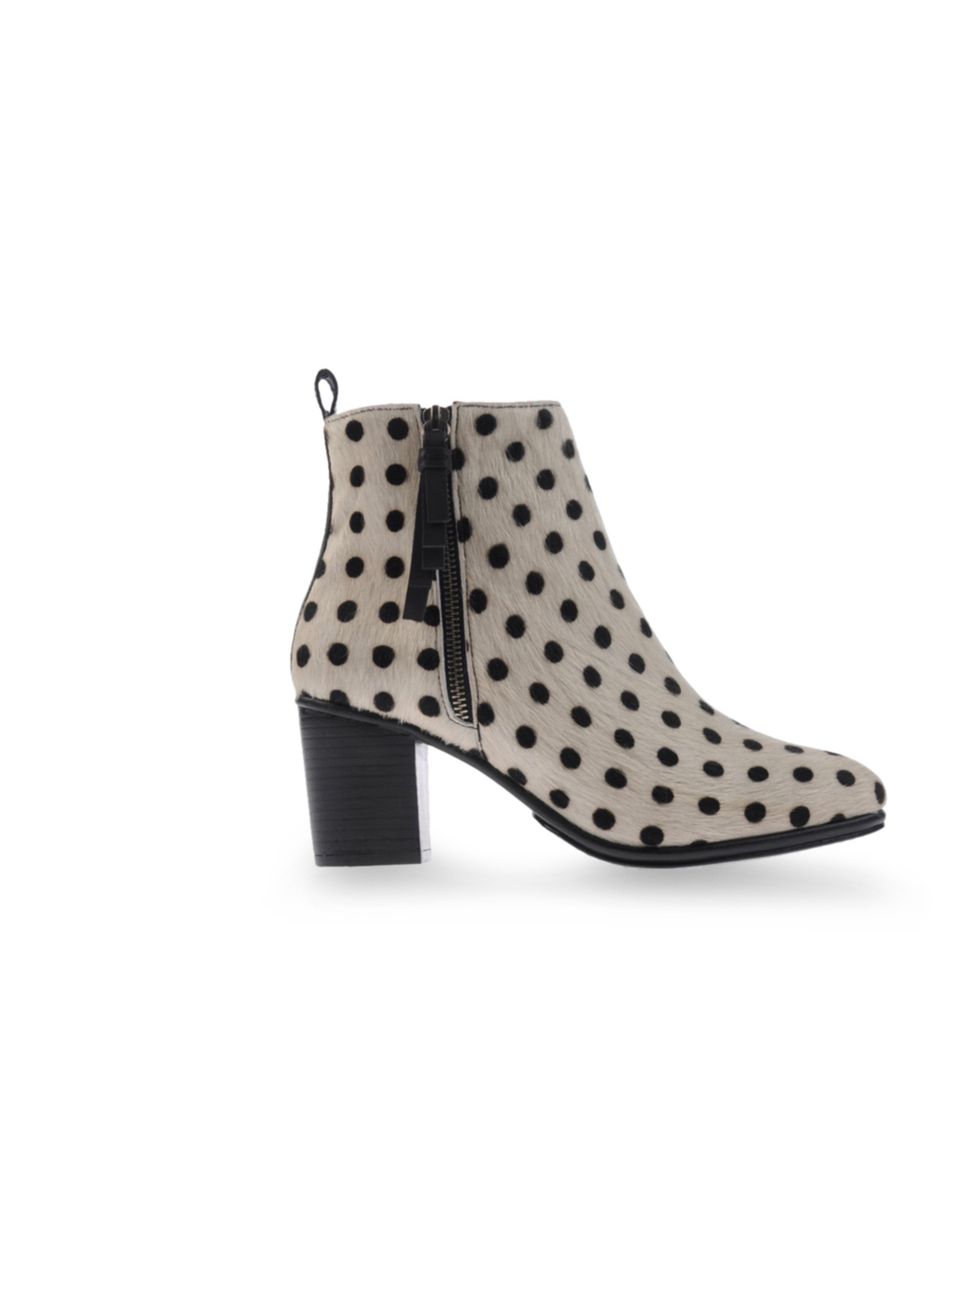 <p>Opening Ceremony polka dot boots, £312, at The Corner</p><p><a href="http://shopping.elleuk.com/browse?fts=opening+ceremony+polka+dot+boots">BUY NOW</a></p>